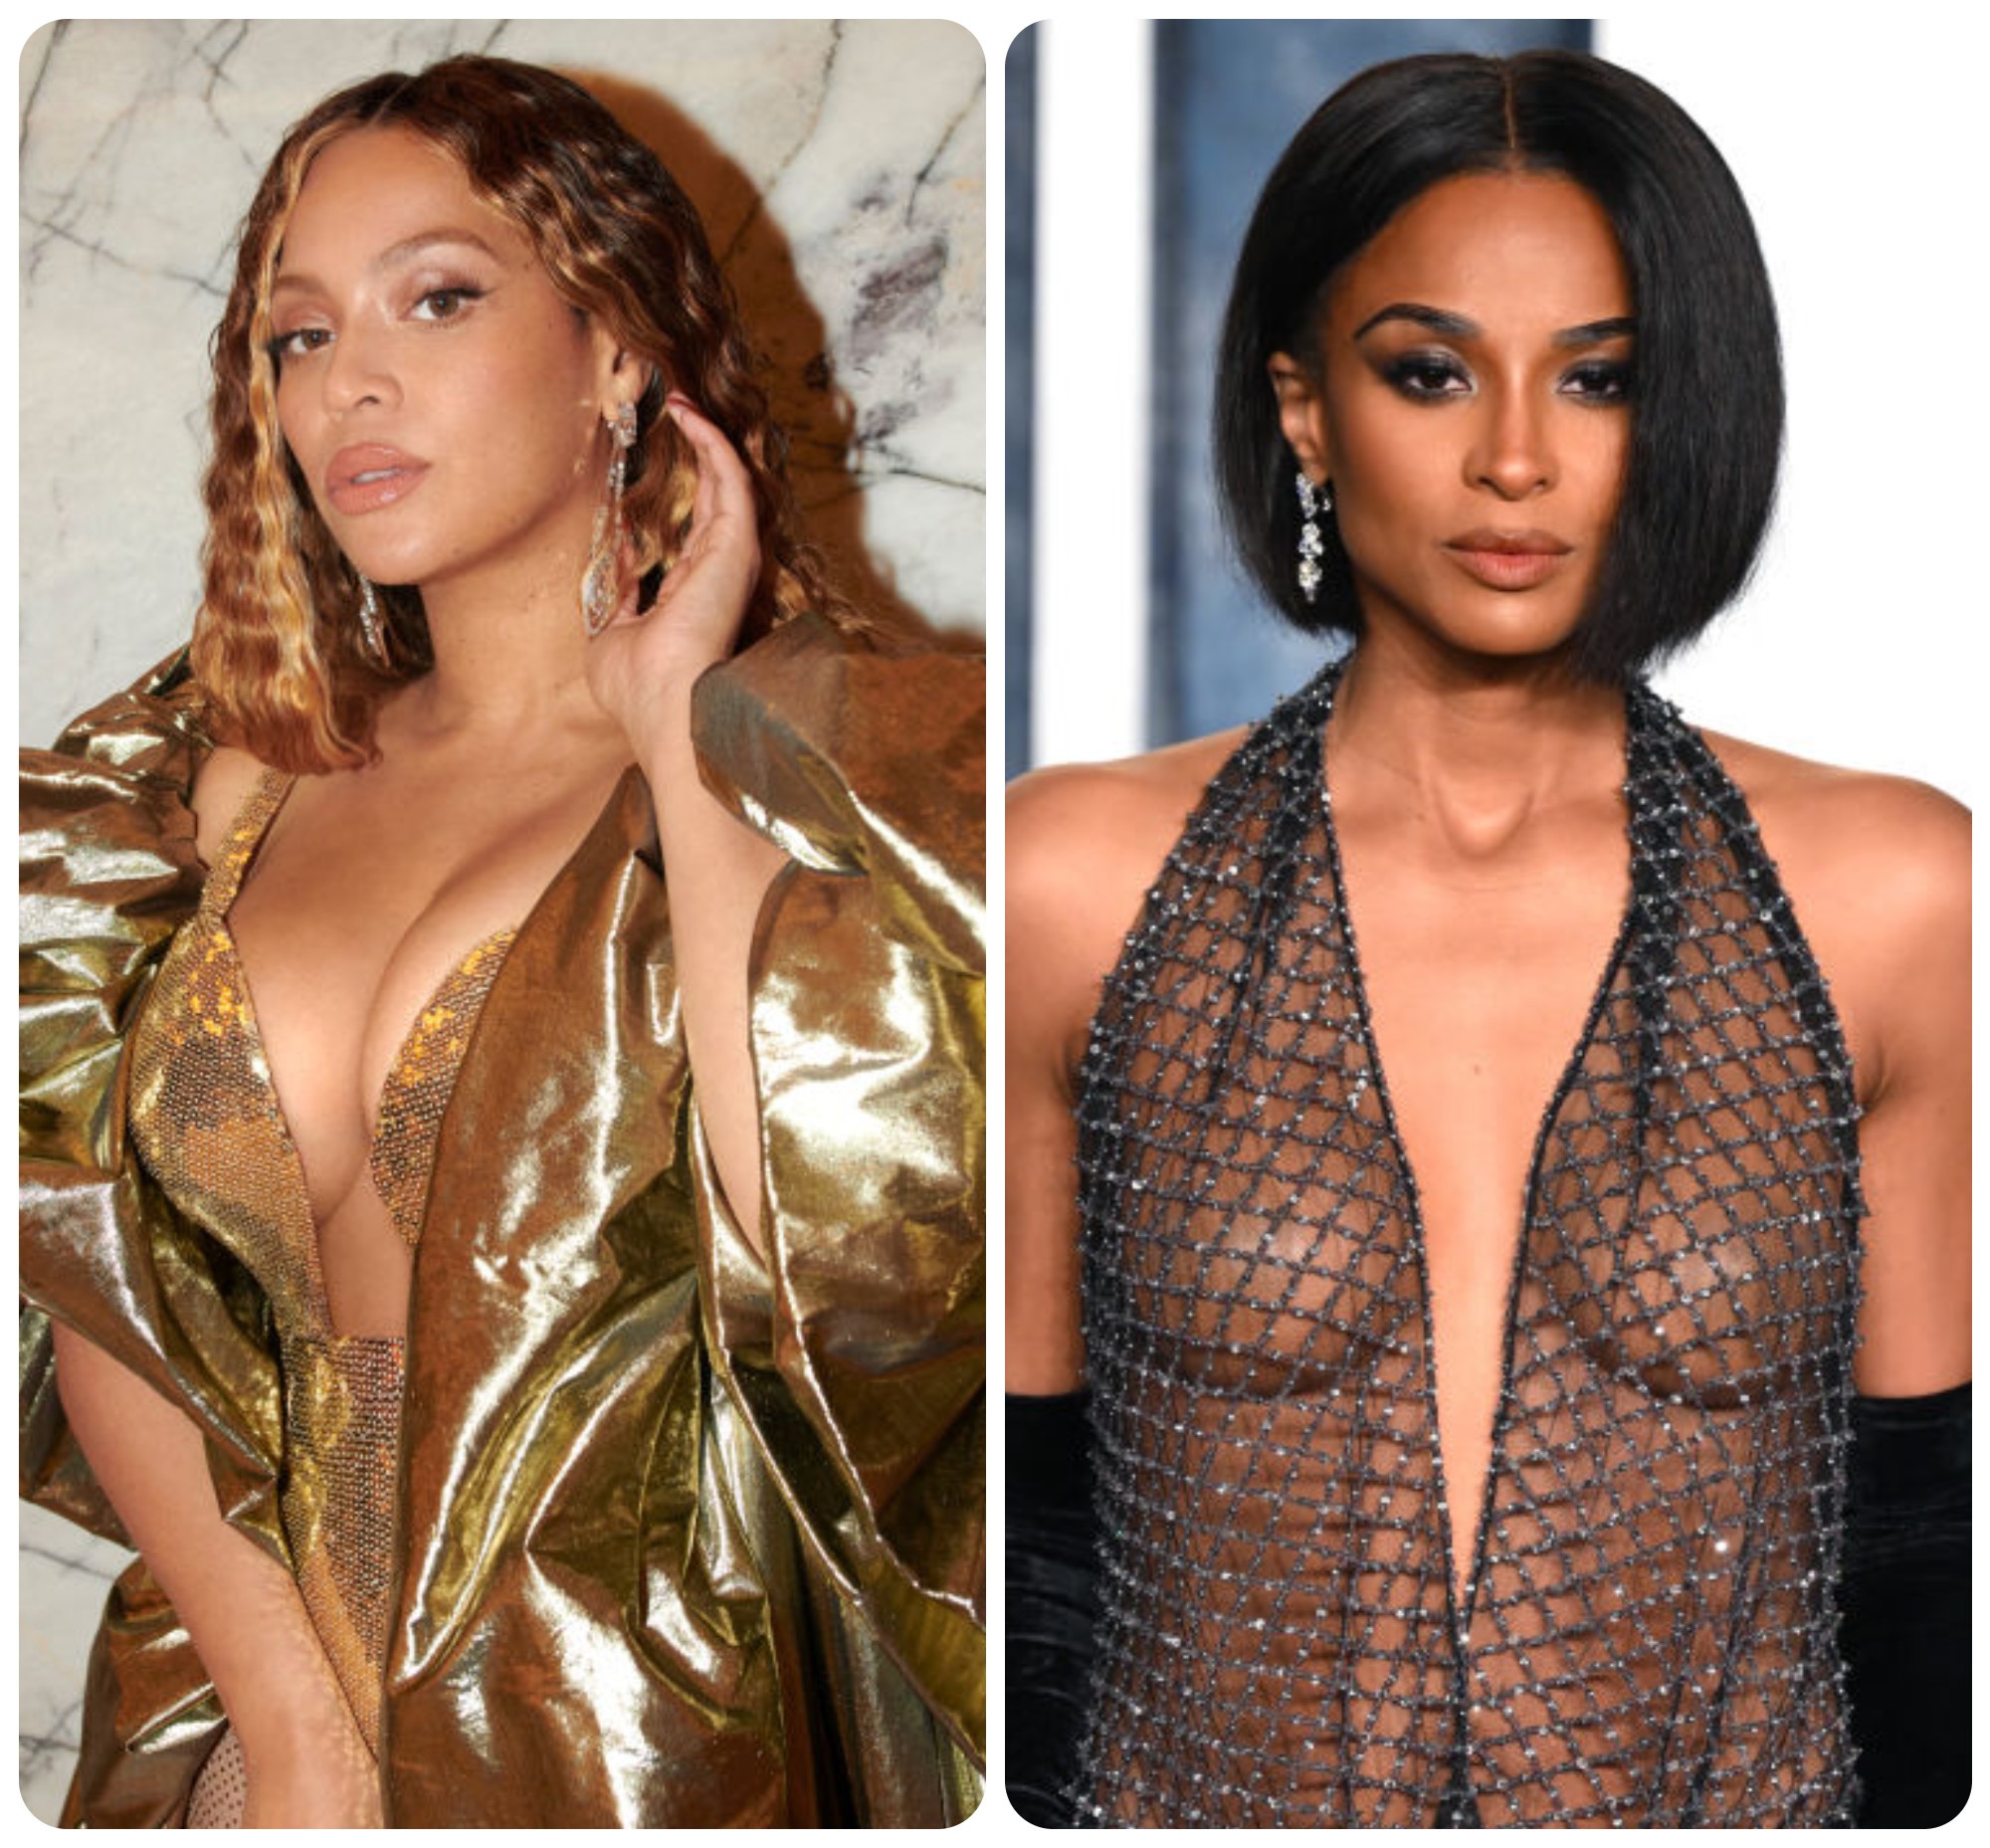 Gold-Gilded Beyoncé Slips Into See-Through Dress For Oscars Party & Garners Ciara Comparisons: ‘Where Were The Think Pieces?’